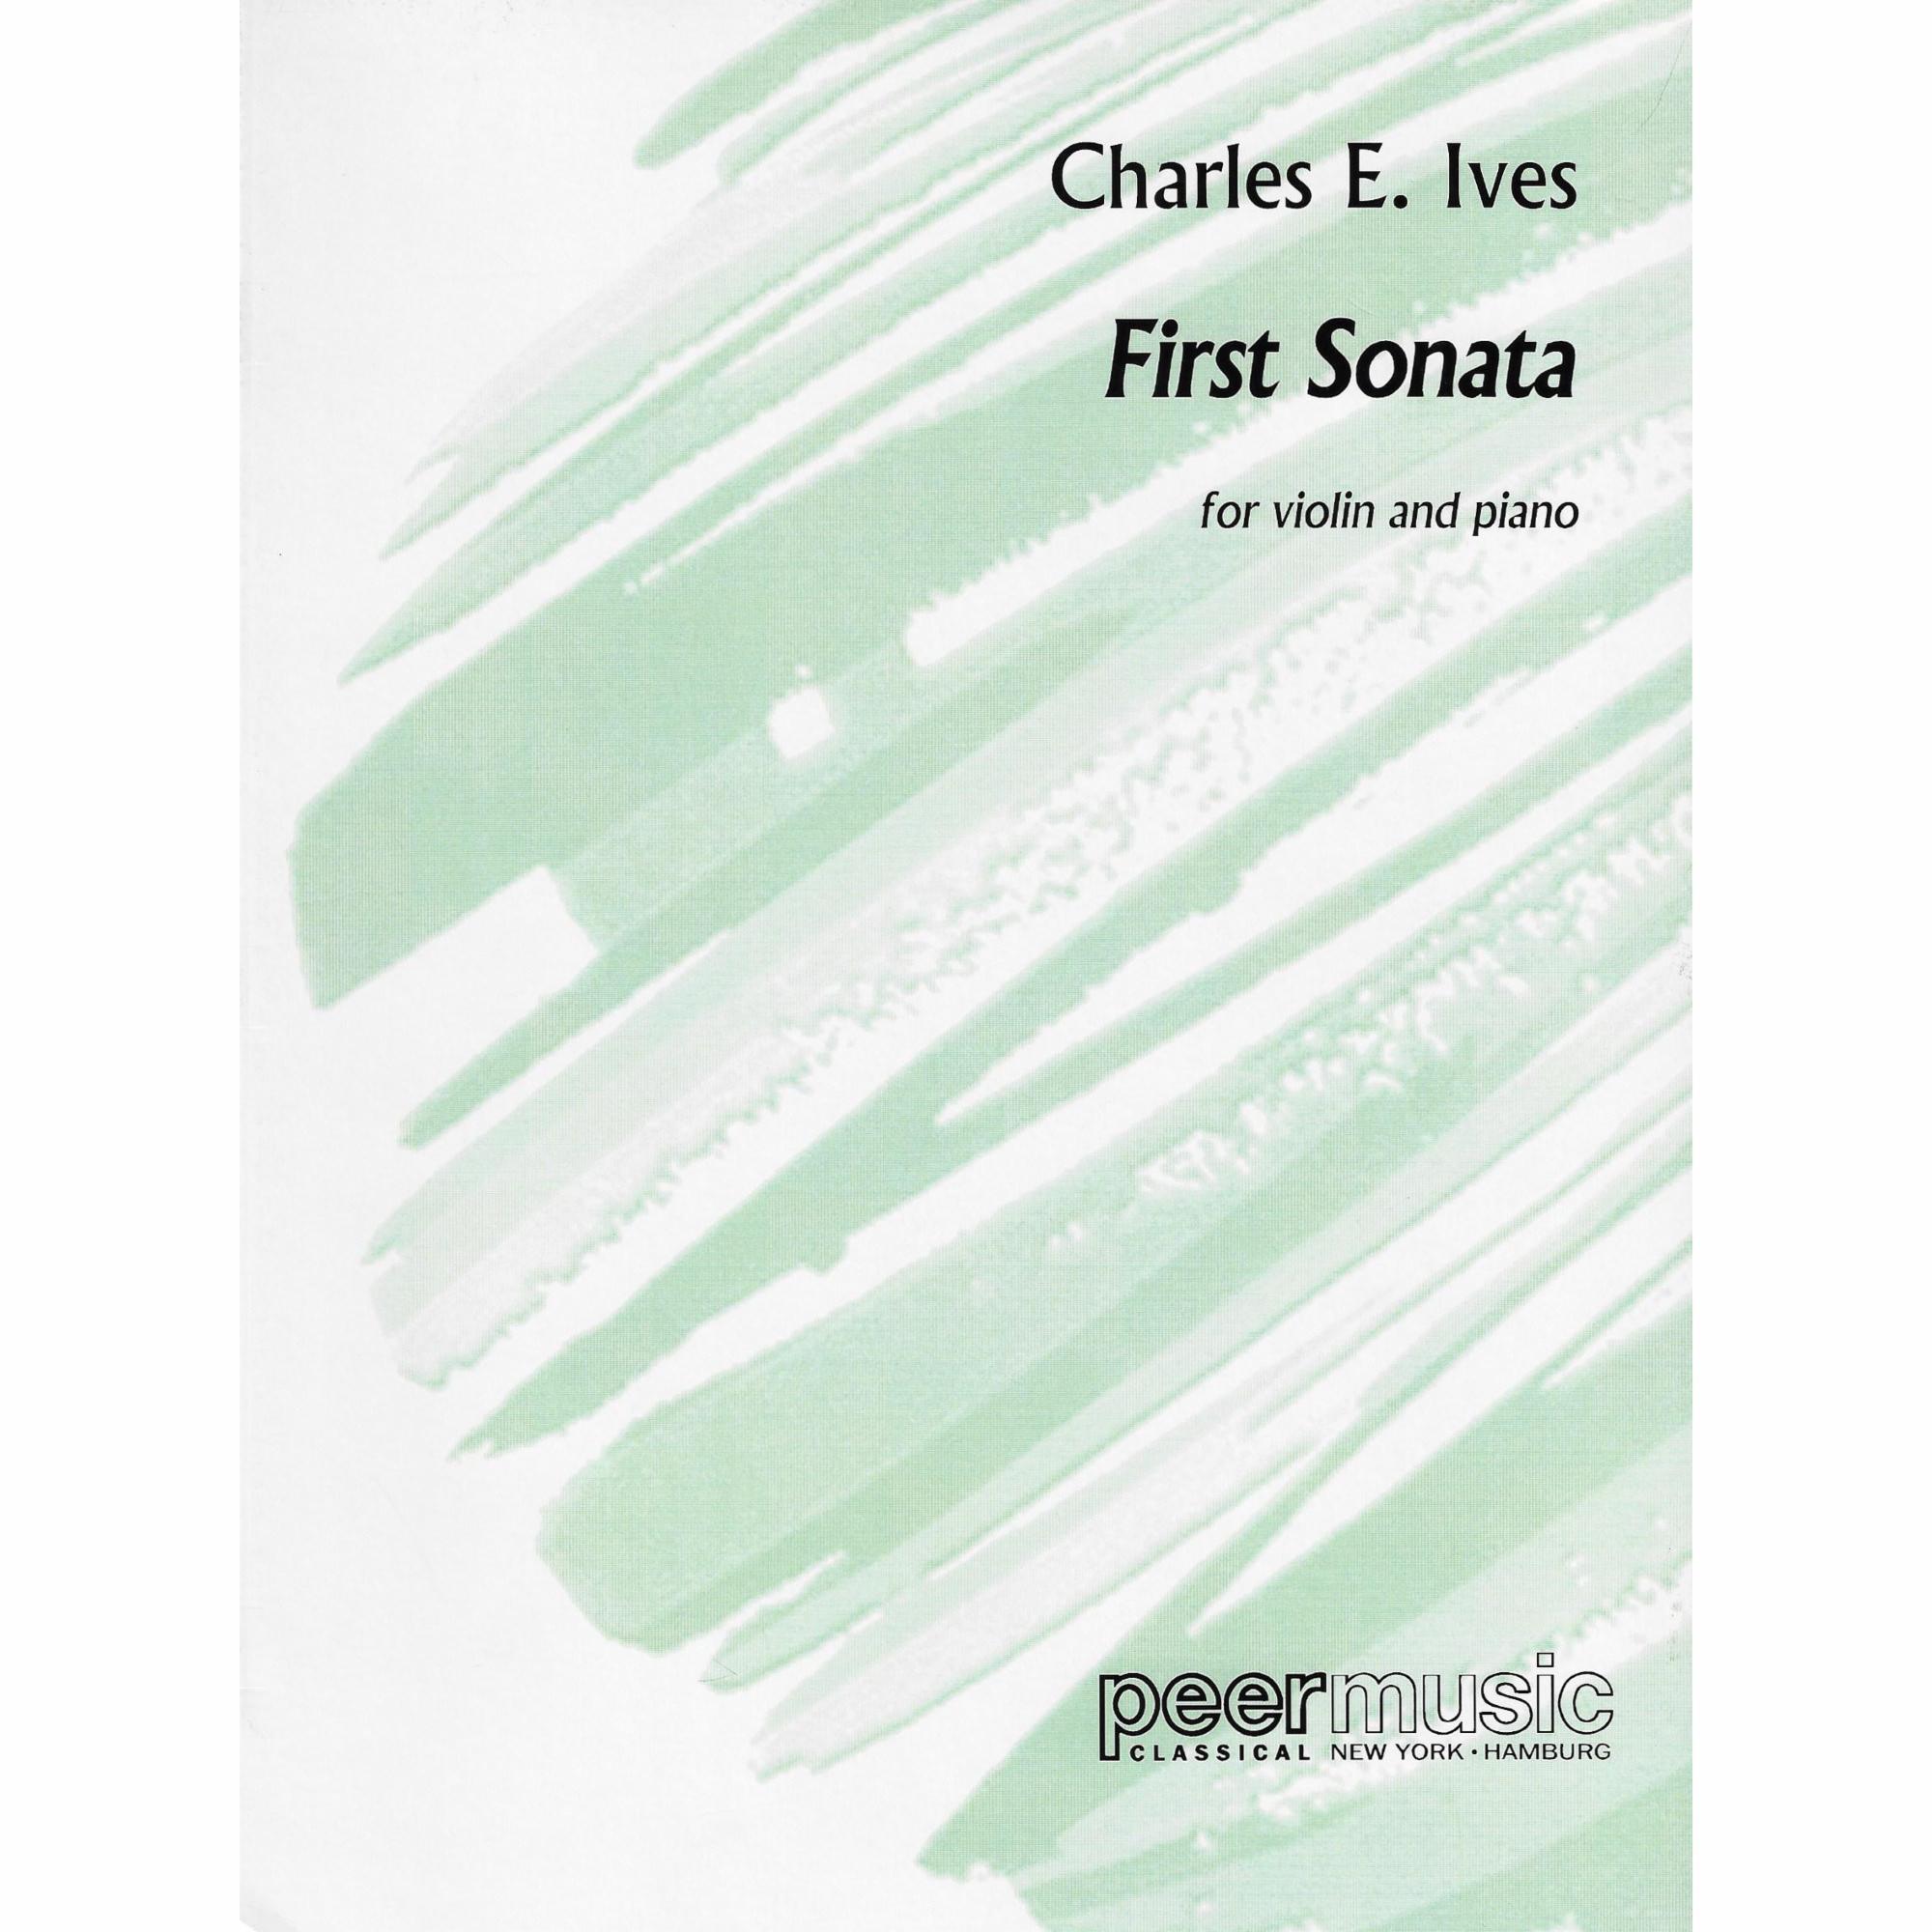 Ives -- First Sonata for Violin and Piano